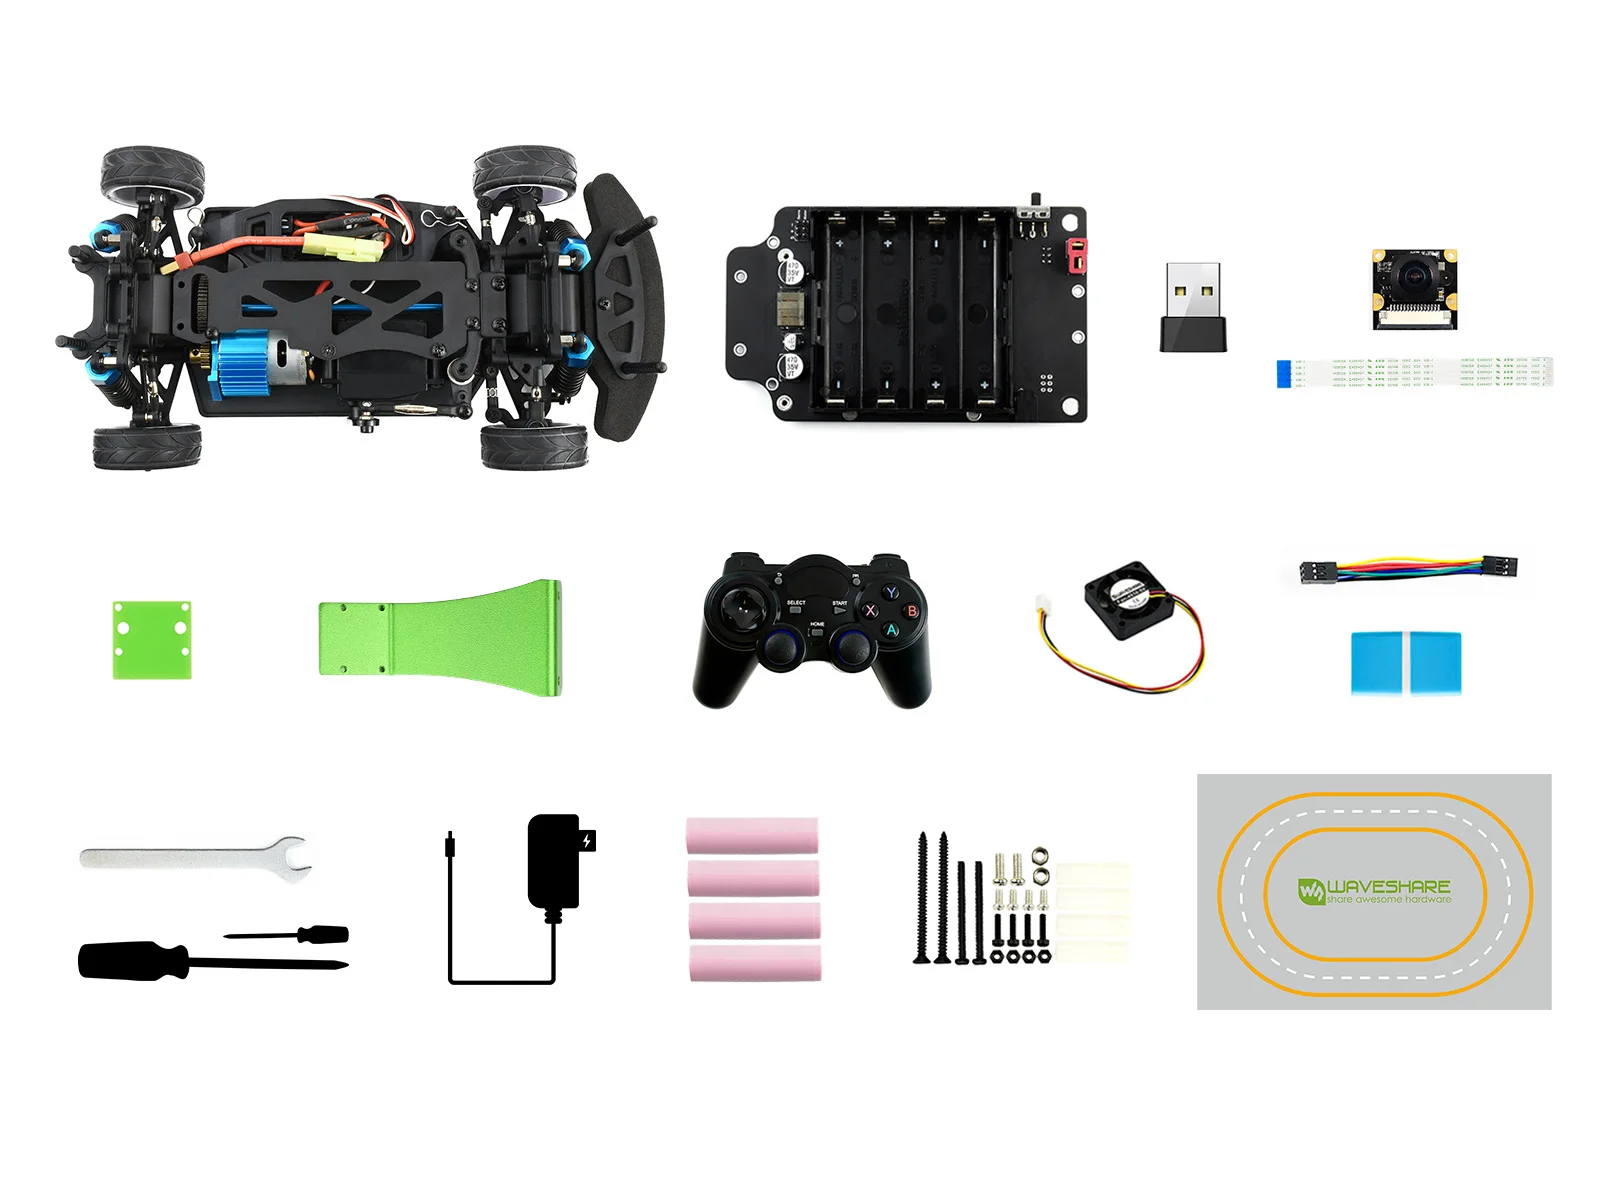 

JetRacer Pro 2GB AI Kit Acce,High Speed AI Racing Robot Accessories package,Powered By Jetson Nano 2GB,Professional Version